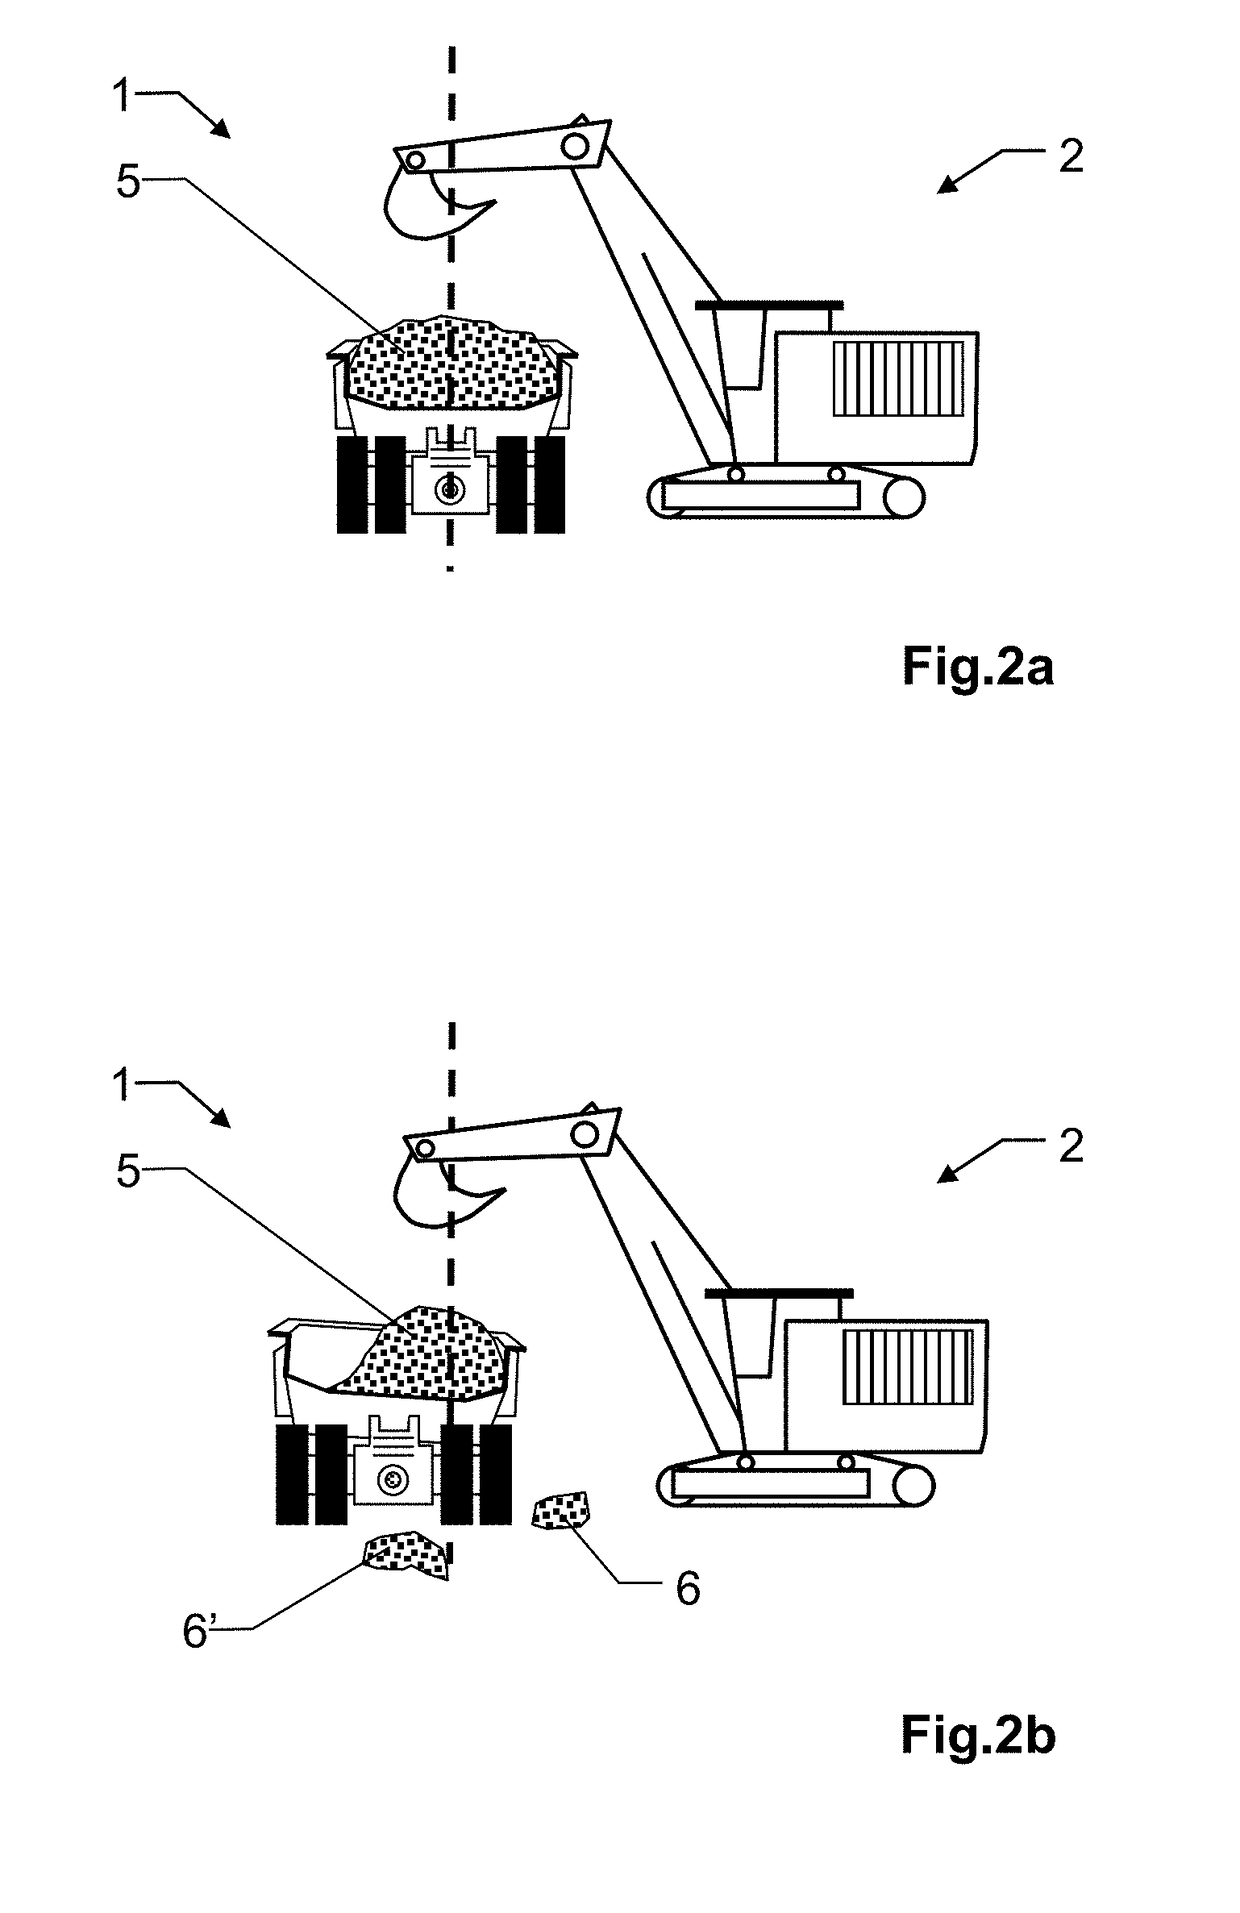 Driving assistance system for reversing a mining haulage vehicle